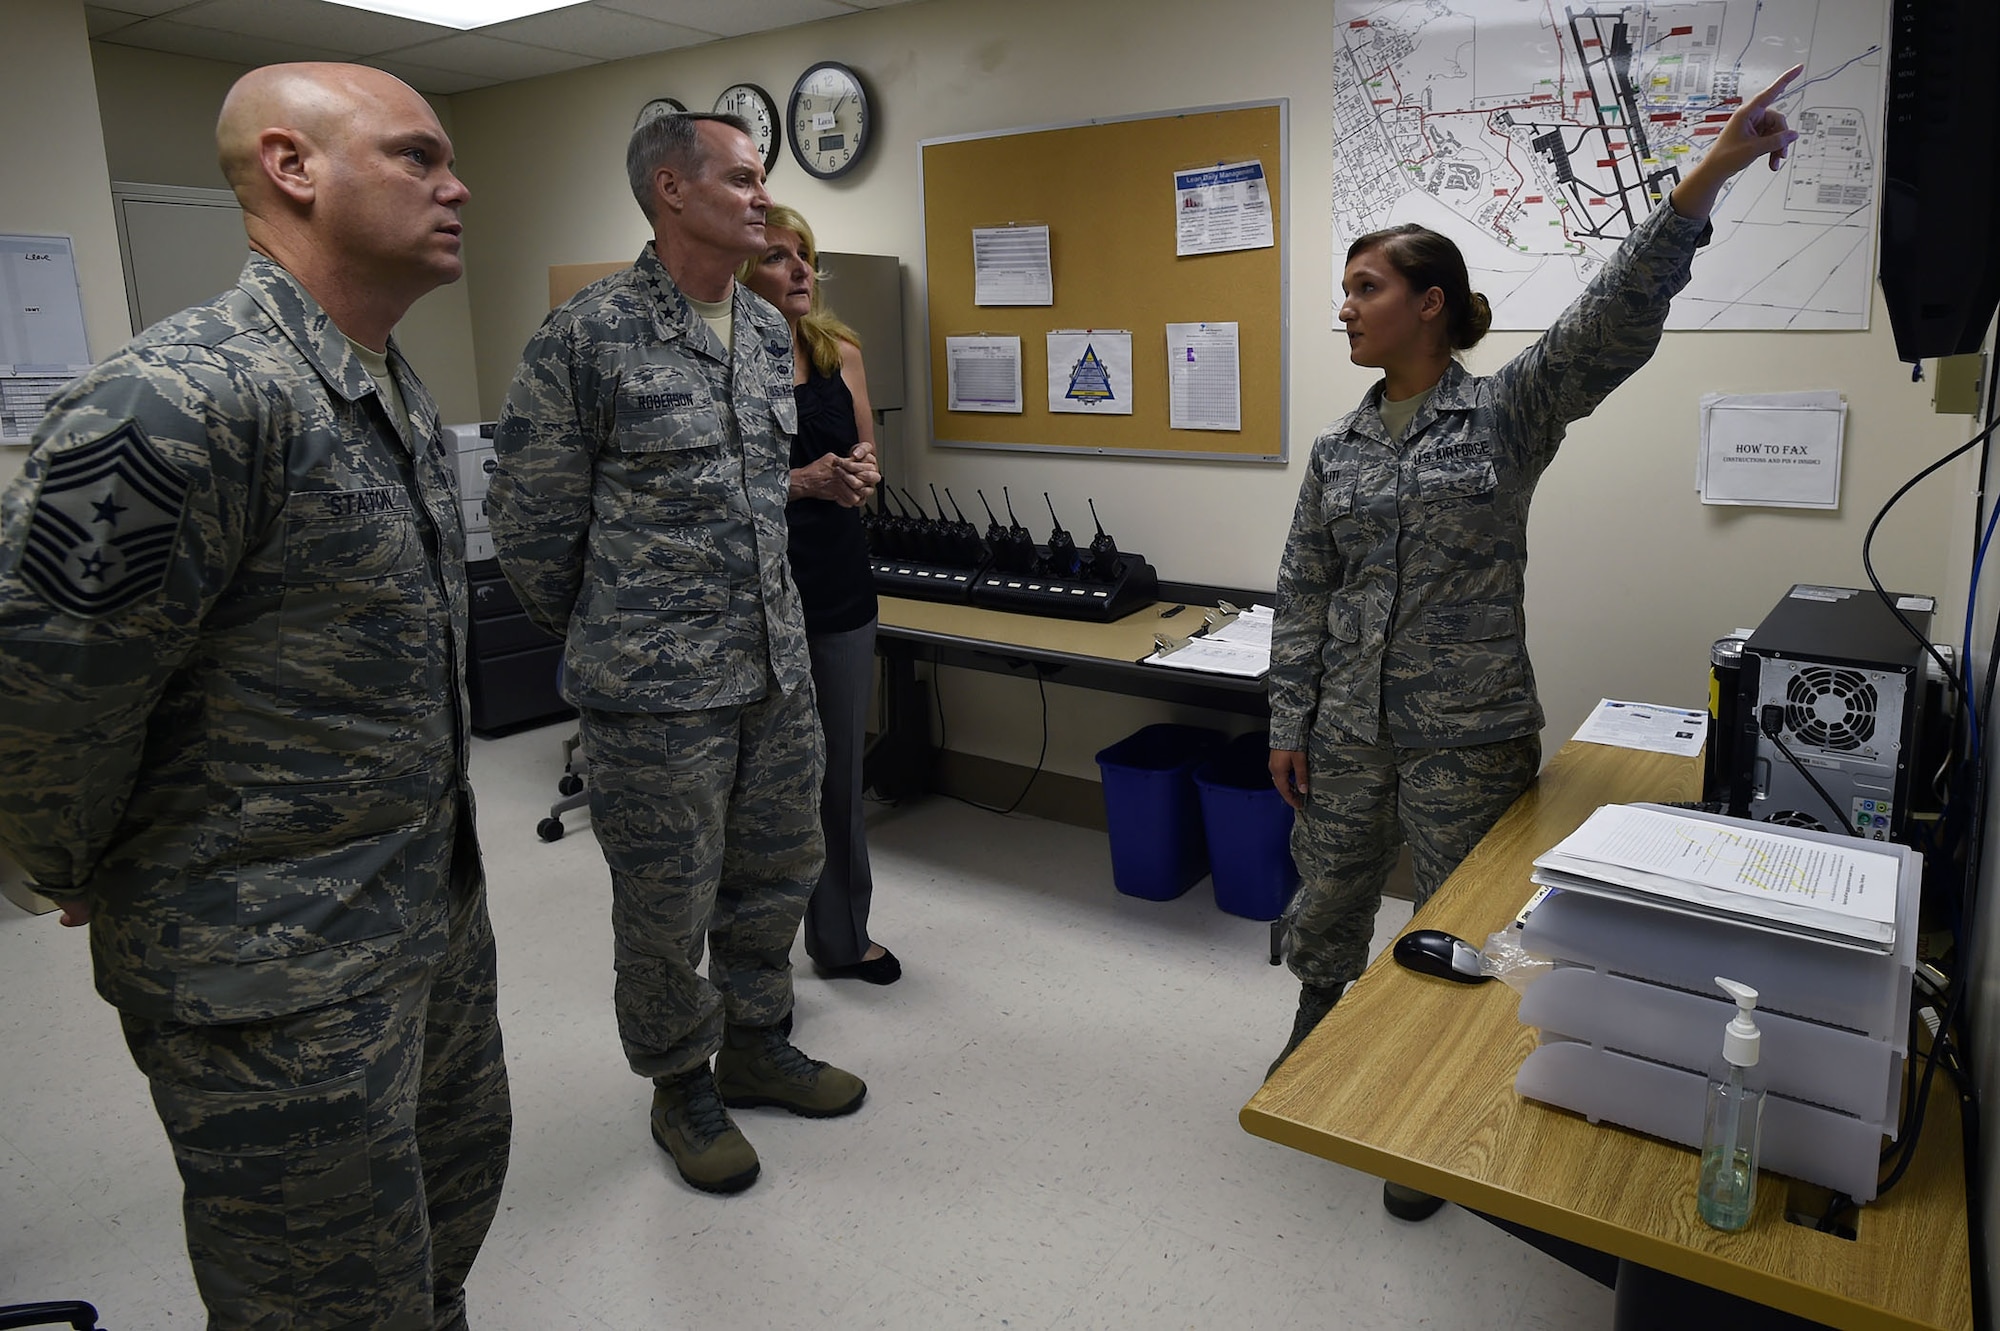 Senior Airman Arlinda Haliti briefs Lt. Gen. Darryl Roberson, commander, Air Education and Training Command, his wife, Cheryl Roberson, and AETC Command Chief Master Sgt. David Staton, on the En-Route Patient Staging System facility and mission May 11 at the Wilford Hall Ambulatory Surgical Center, Joint Base San Antonio-Lackland.  Roberson and Staton visited the WHASC May11, meeting with 59th Medical Wing senior leaders and Airmen to learn more about the wing’s mission of developing warrior medics through patient-centered health care and continuous improvement. Haliti is an aerospace medical technician with the 559th Aerospace Medicine Squadron. (U.S. Air Force photo/Staff Sgt. Jason Huddleston)